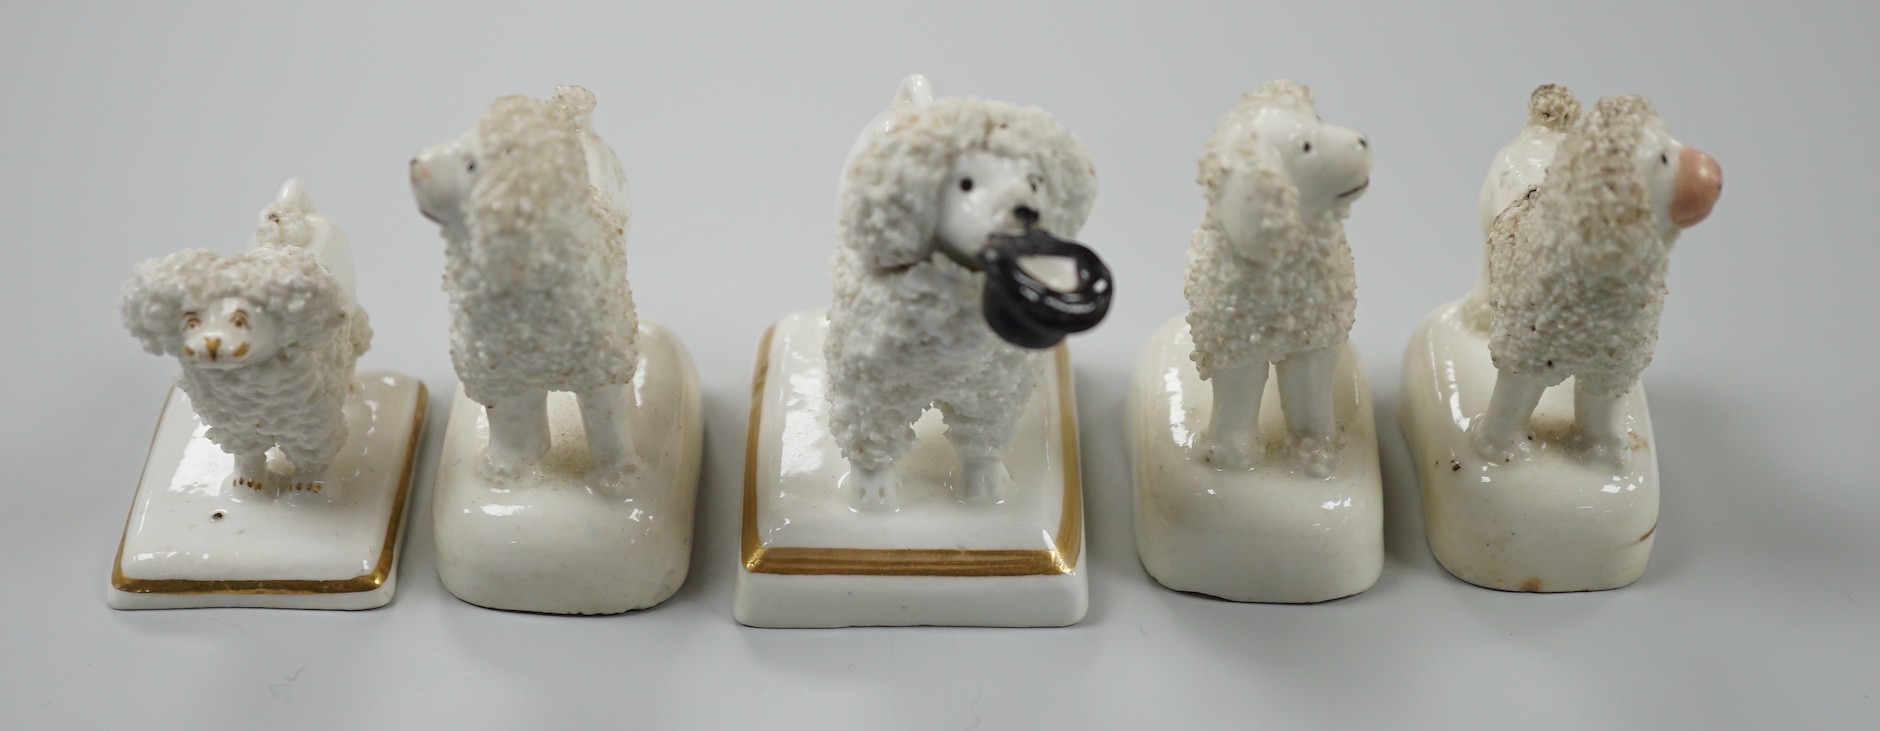 Five small Staffordshire models of poodles standing on their bases, to include a Lloyd Shelton white poodle with black muzzle, and a Lloyd Shelton white poodle with flicked tail (5), c.1830-50. Tallest 6cm, Cf. Dennis G.